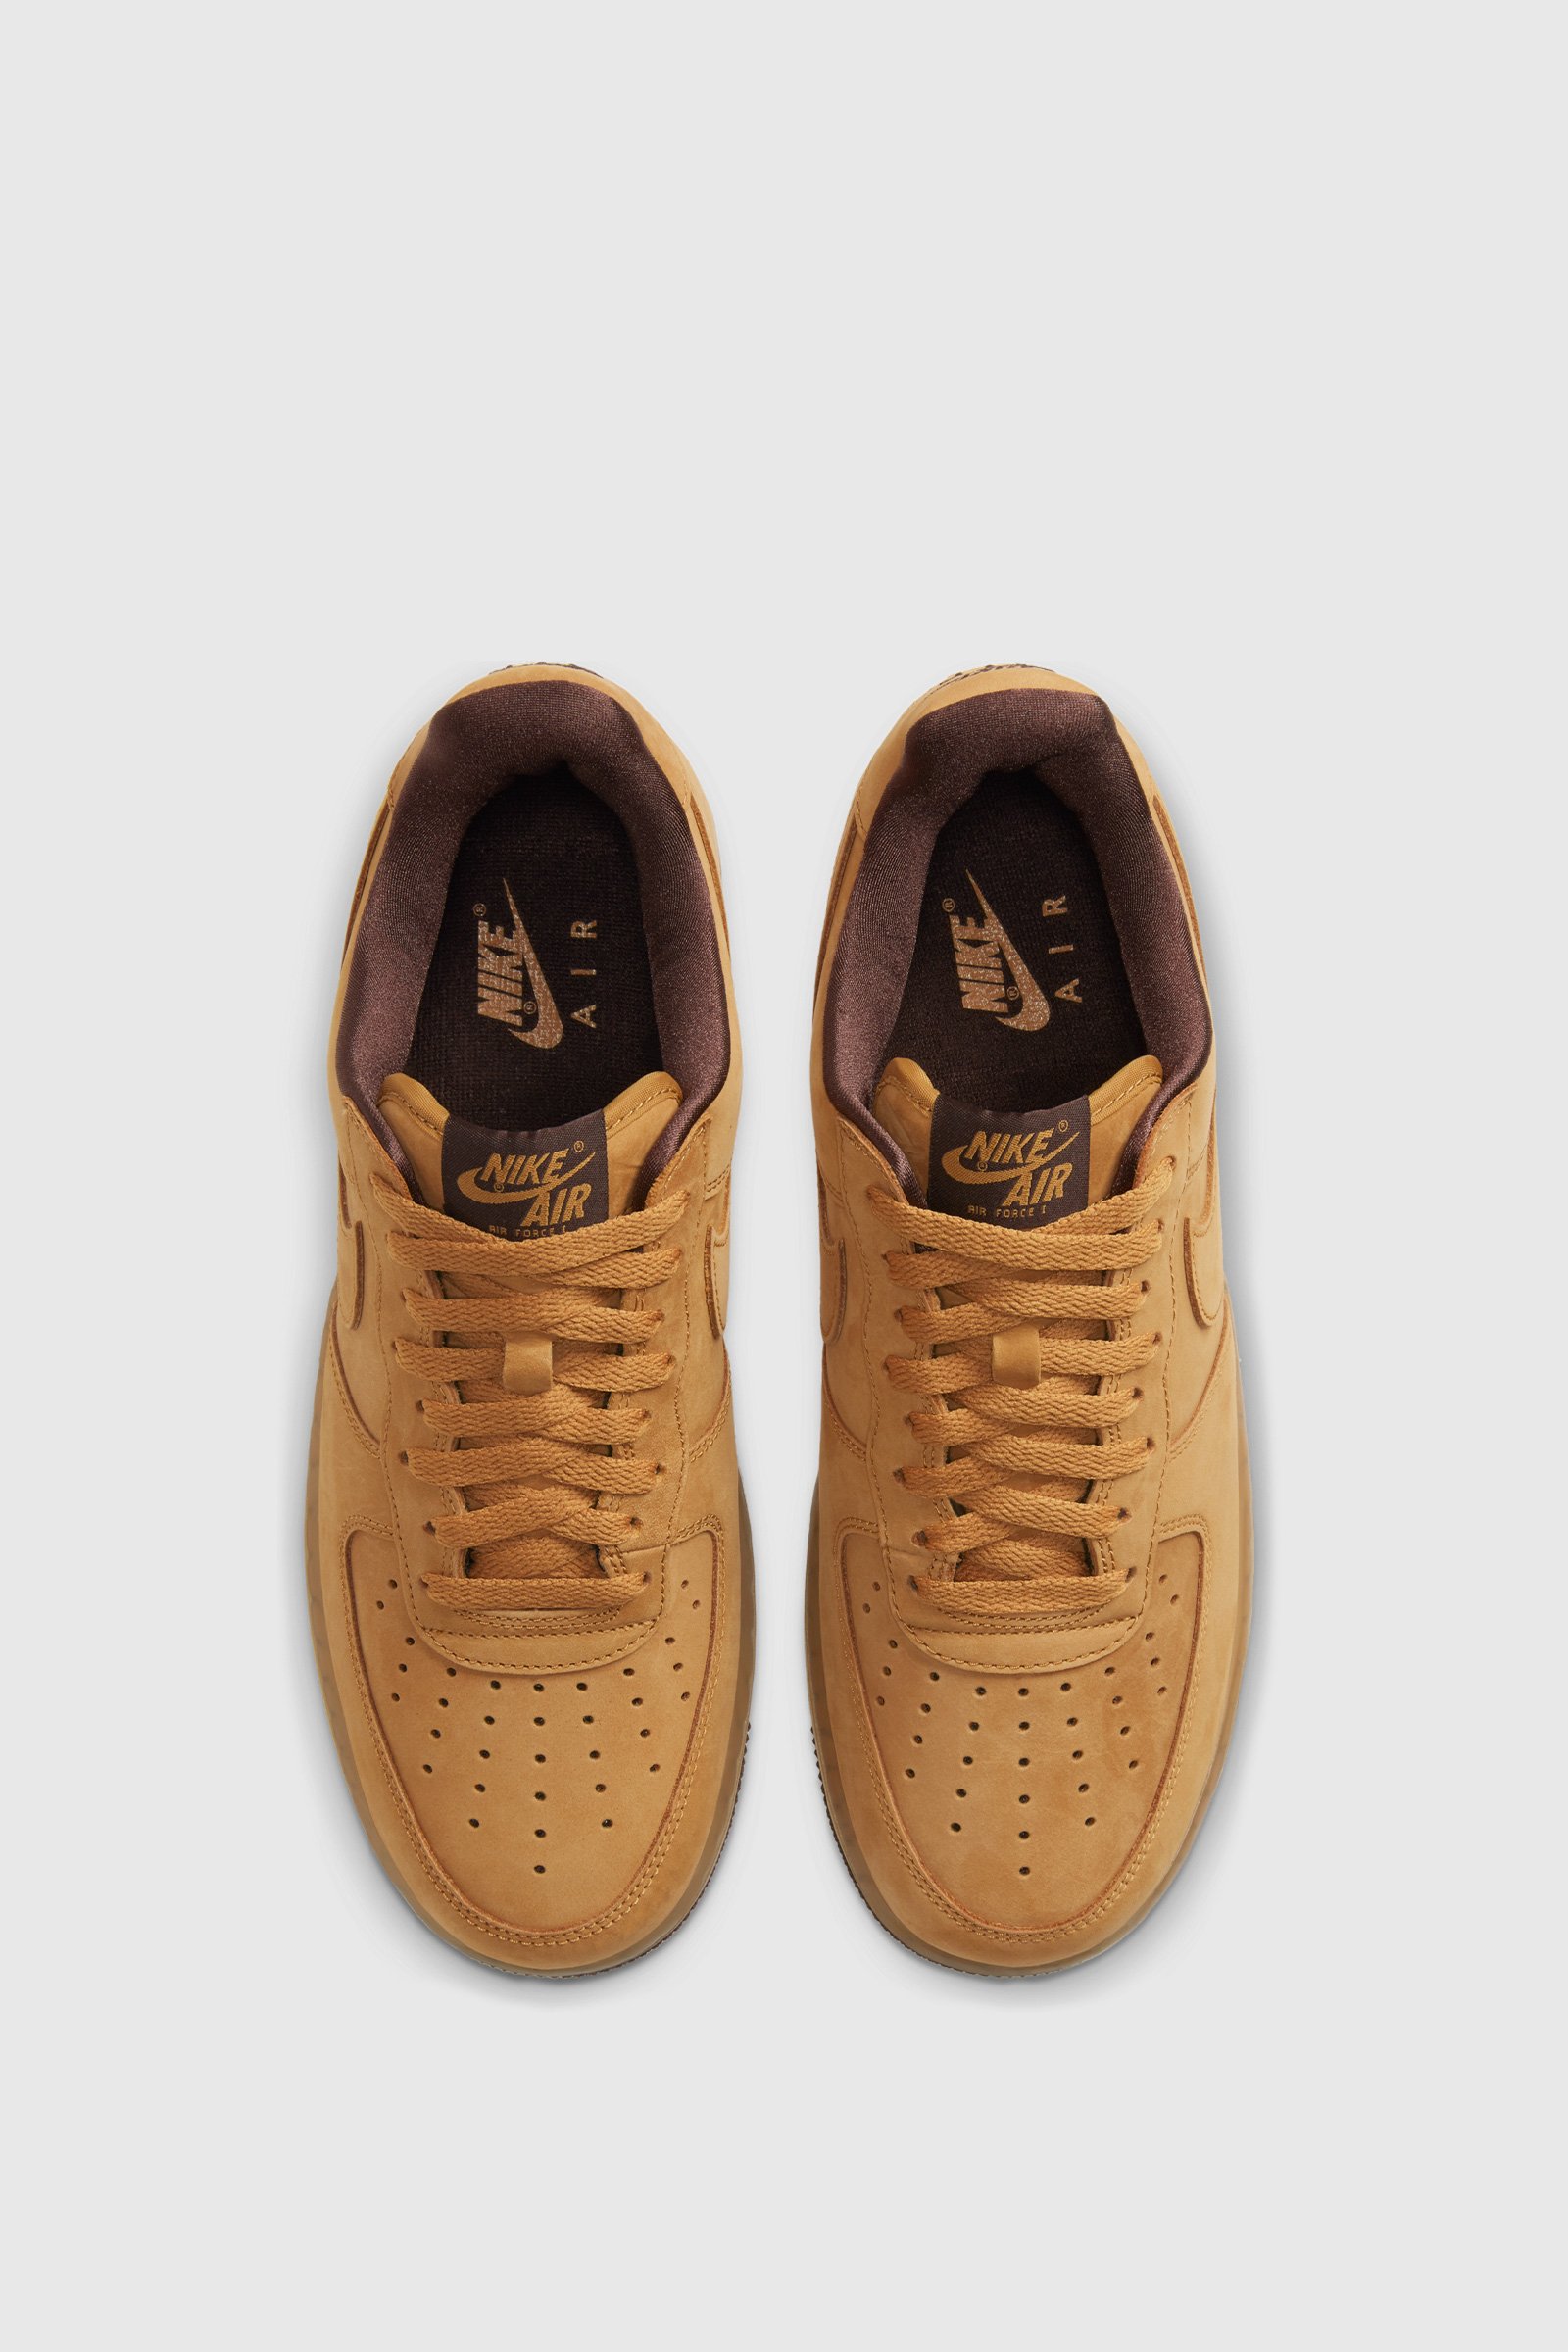 nike air force 1 low retro sp wheat